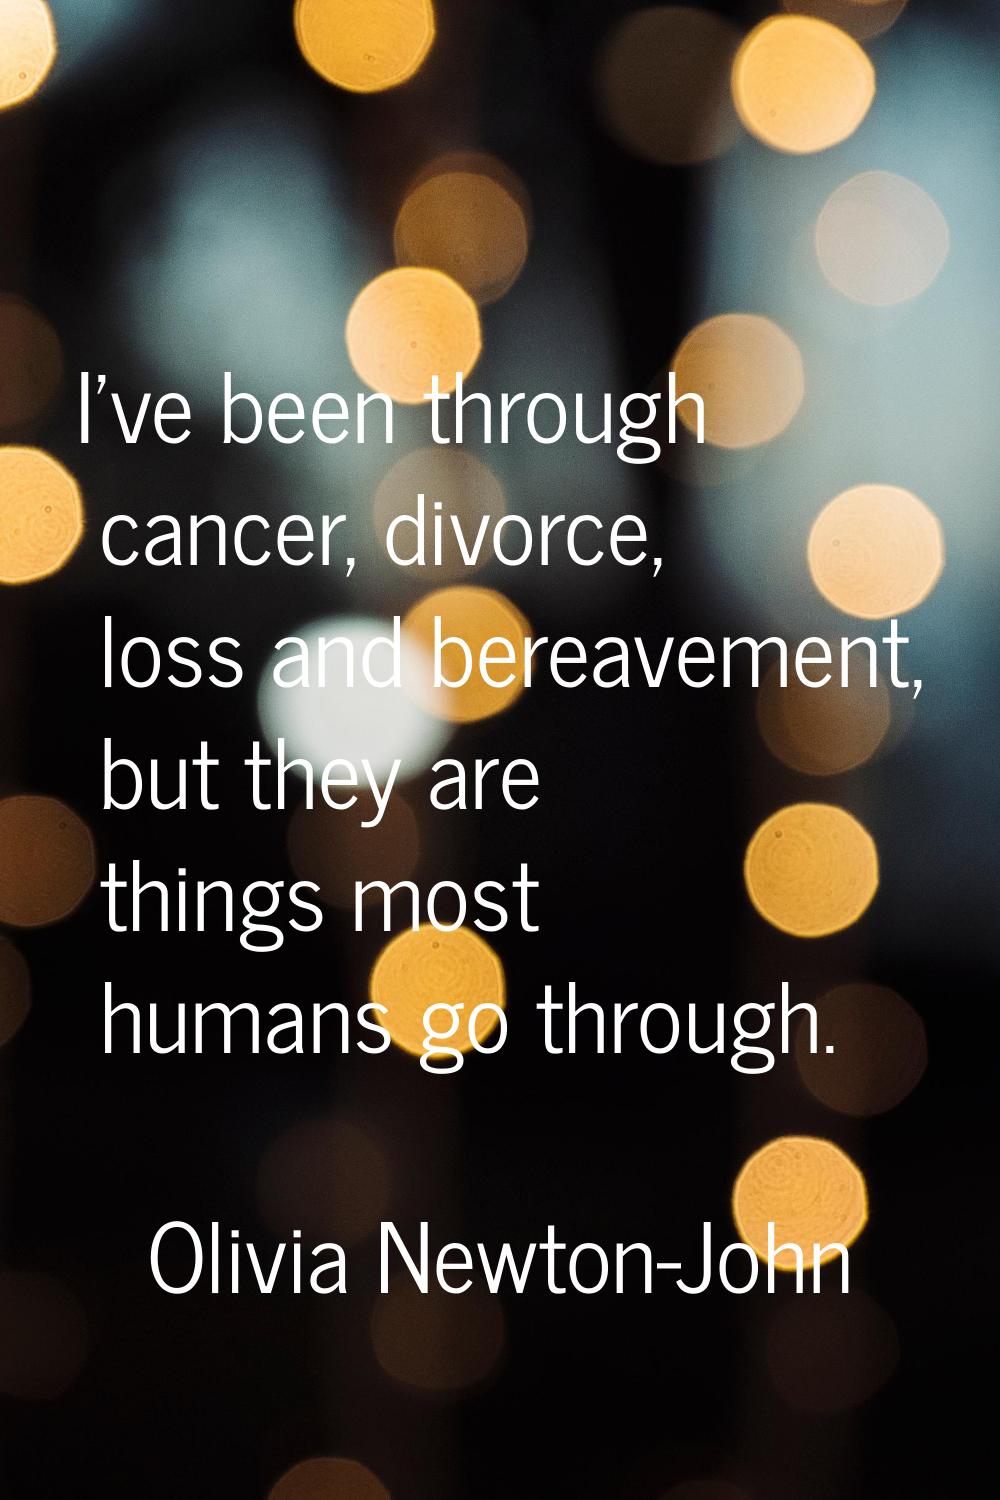 I've been through cancer, divorce, loss and bereavement, but they are things most humans go through